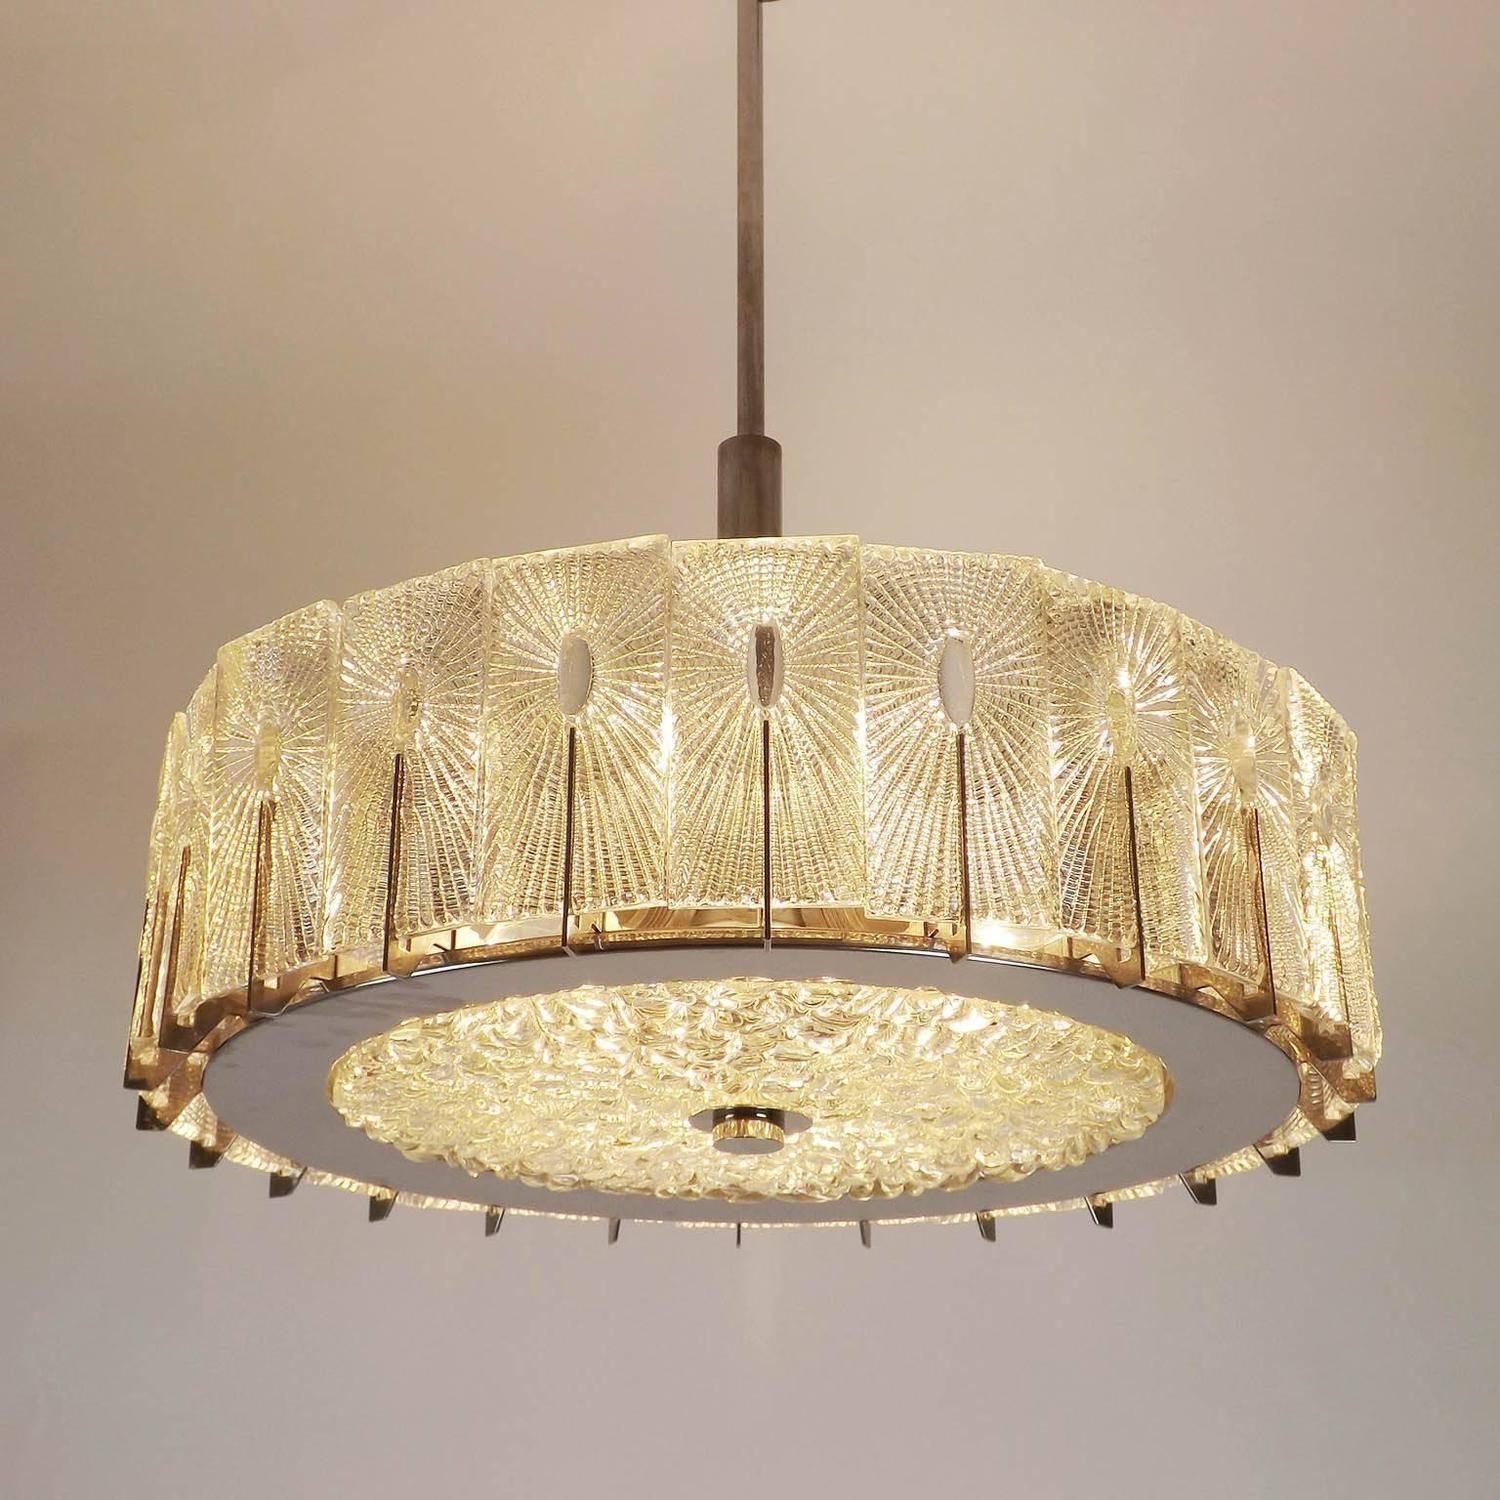 Mid-20th Century Chandelier by Rupert Nikoll, Textured Glass and Nickel, 1960 For Sale